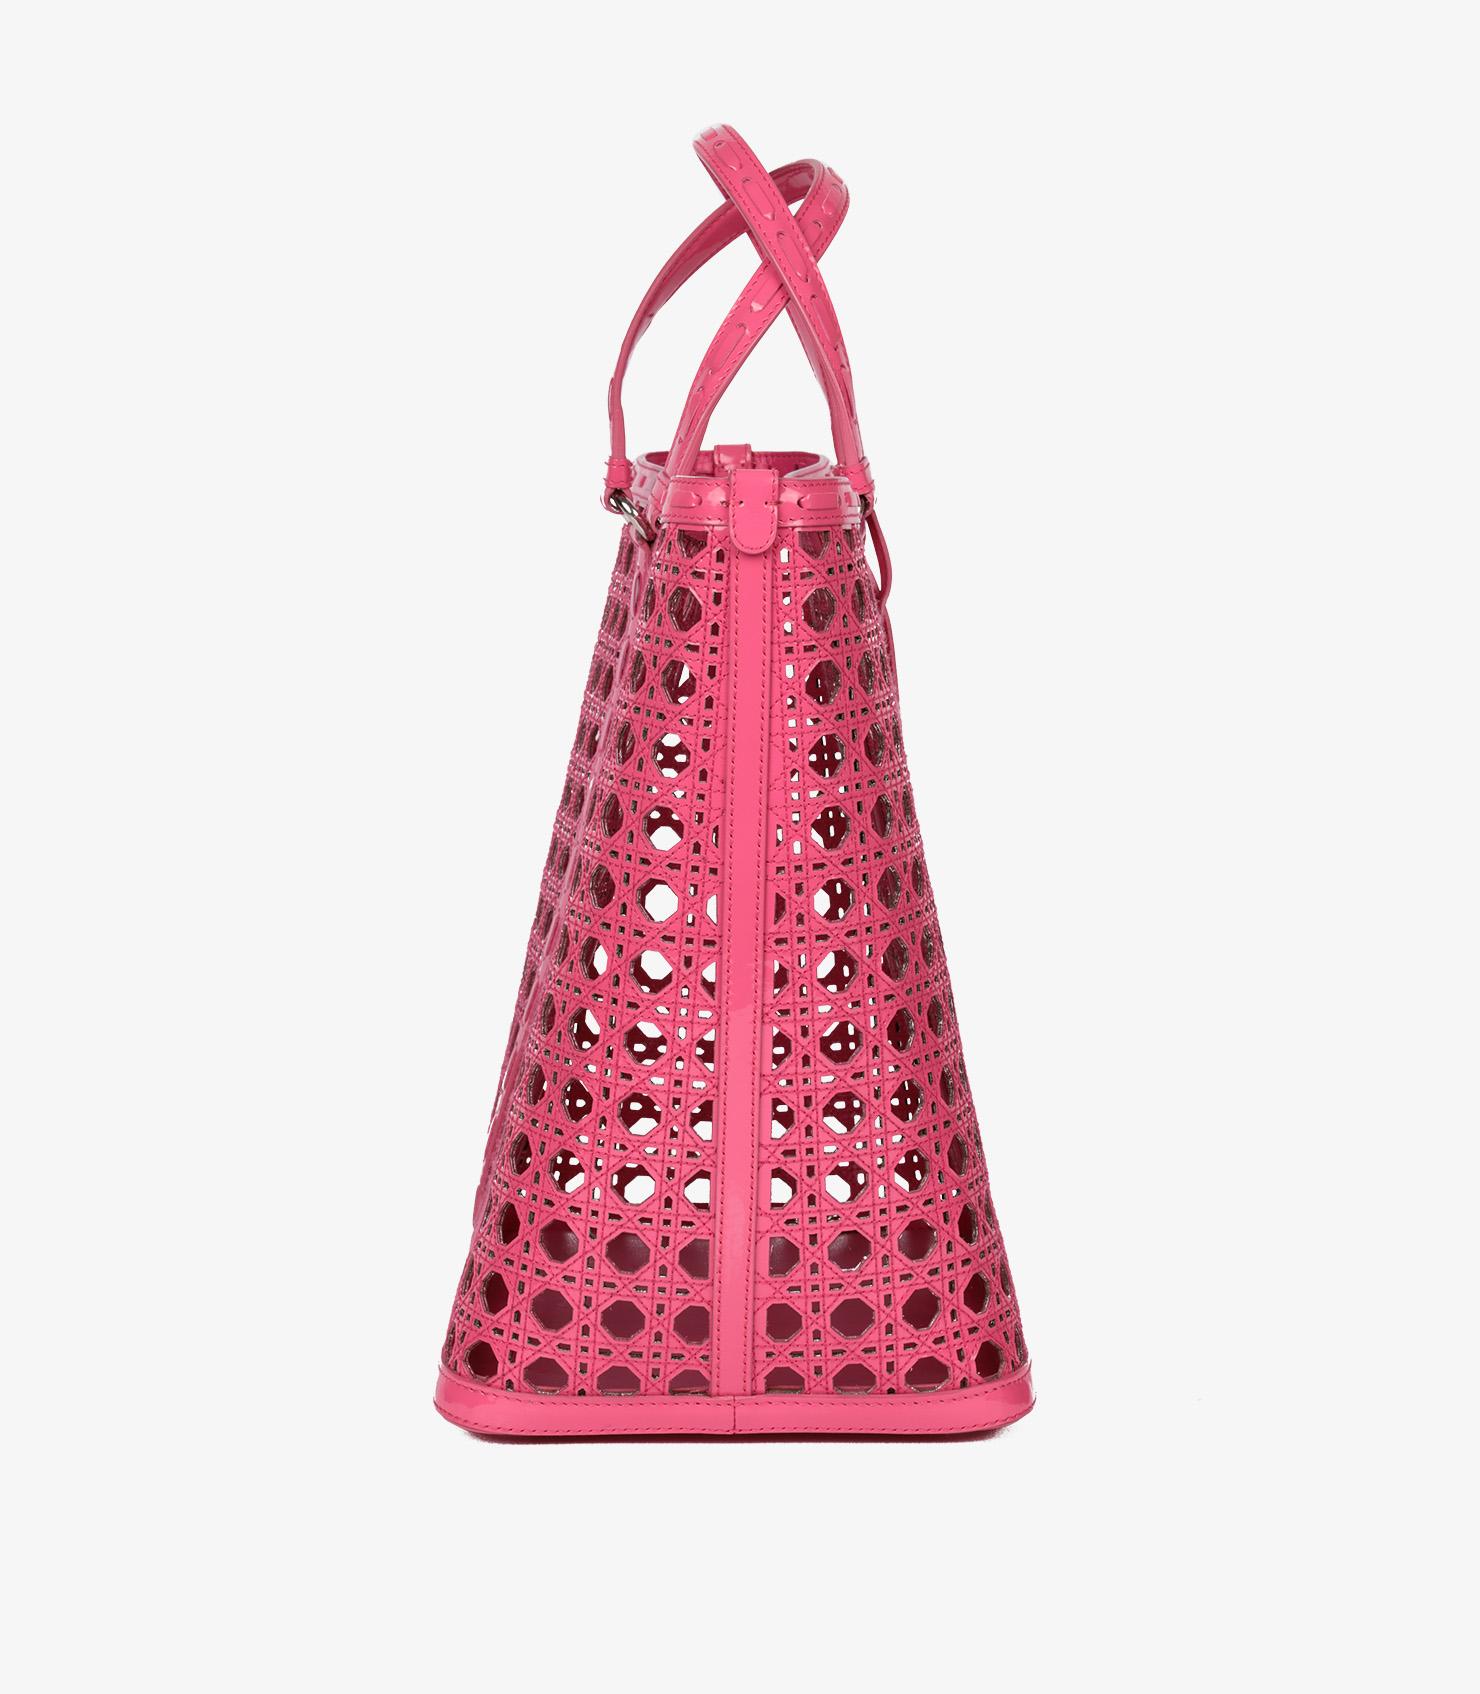 Women's Christian Dior Pink Perforated Patent Leather Tote Bag For Sale